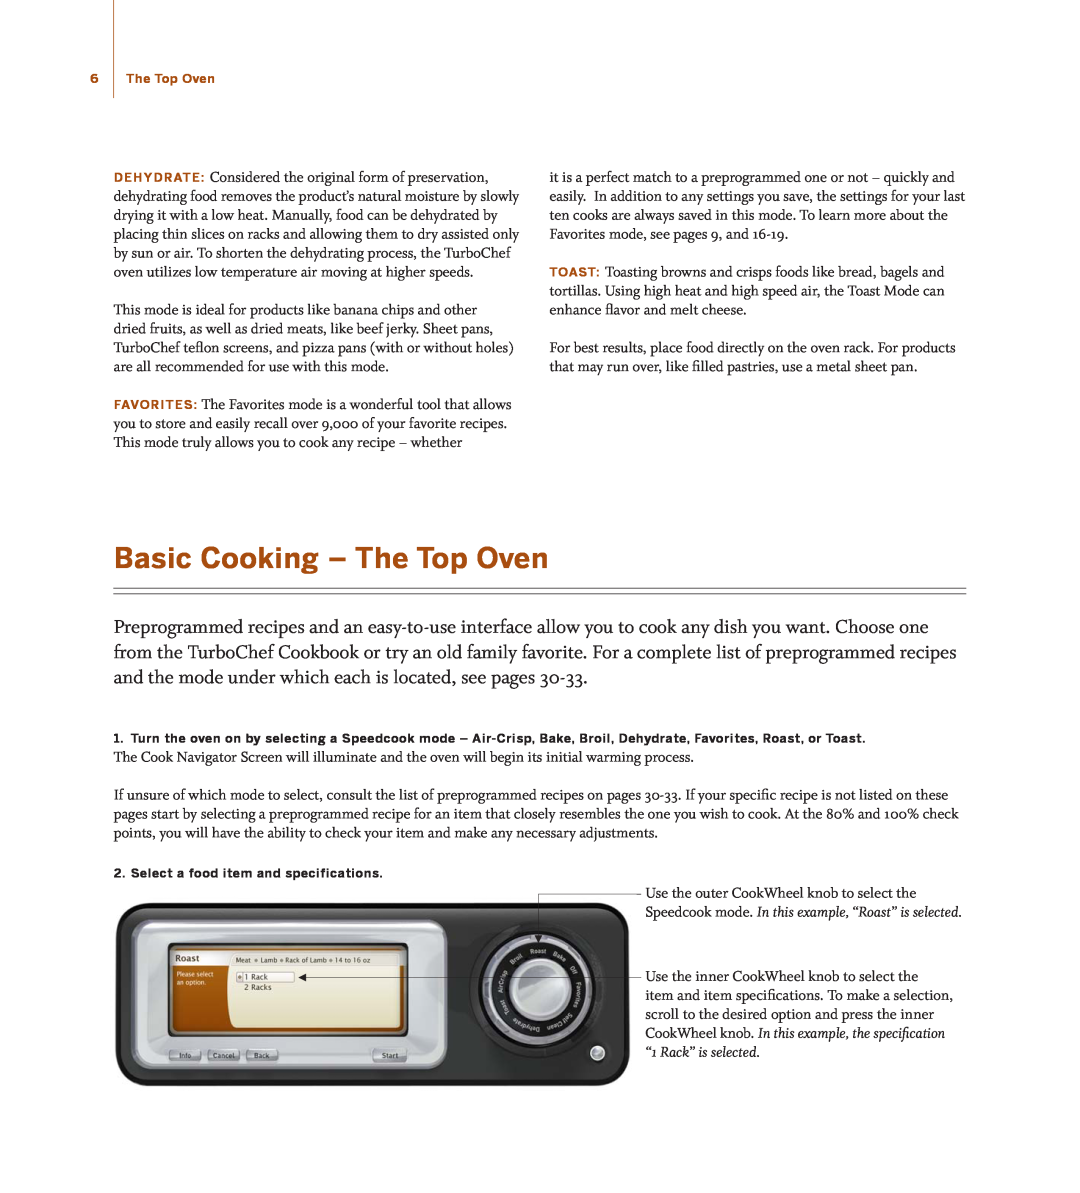 Turbo Chef Technologies TD030*208 manual Basic Cooking - The Top Oven, Speedcook mode. In this example, “Roast” is selected 